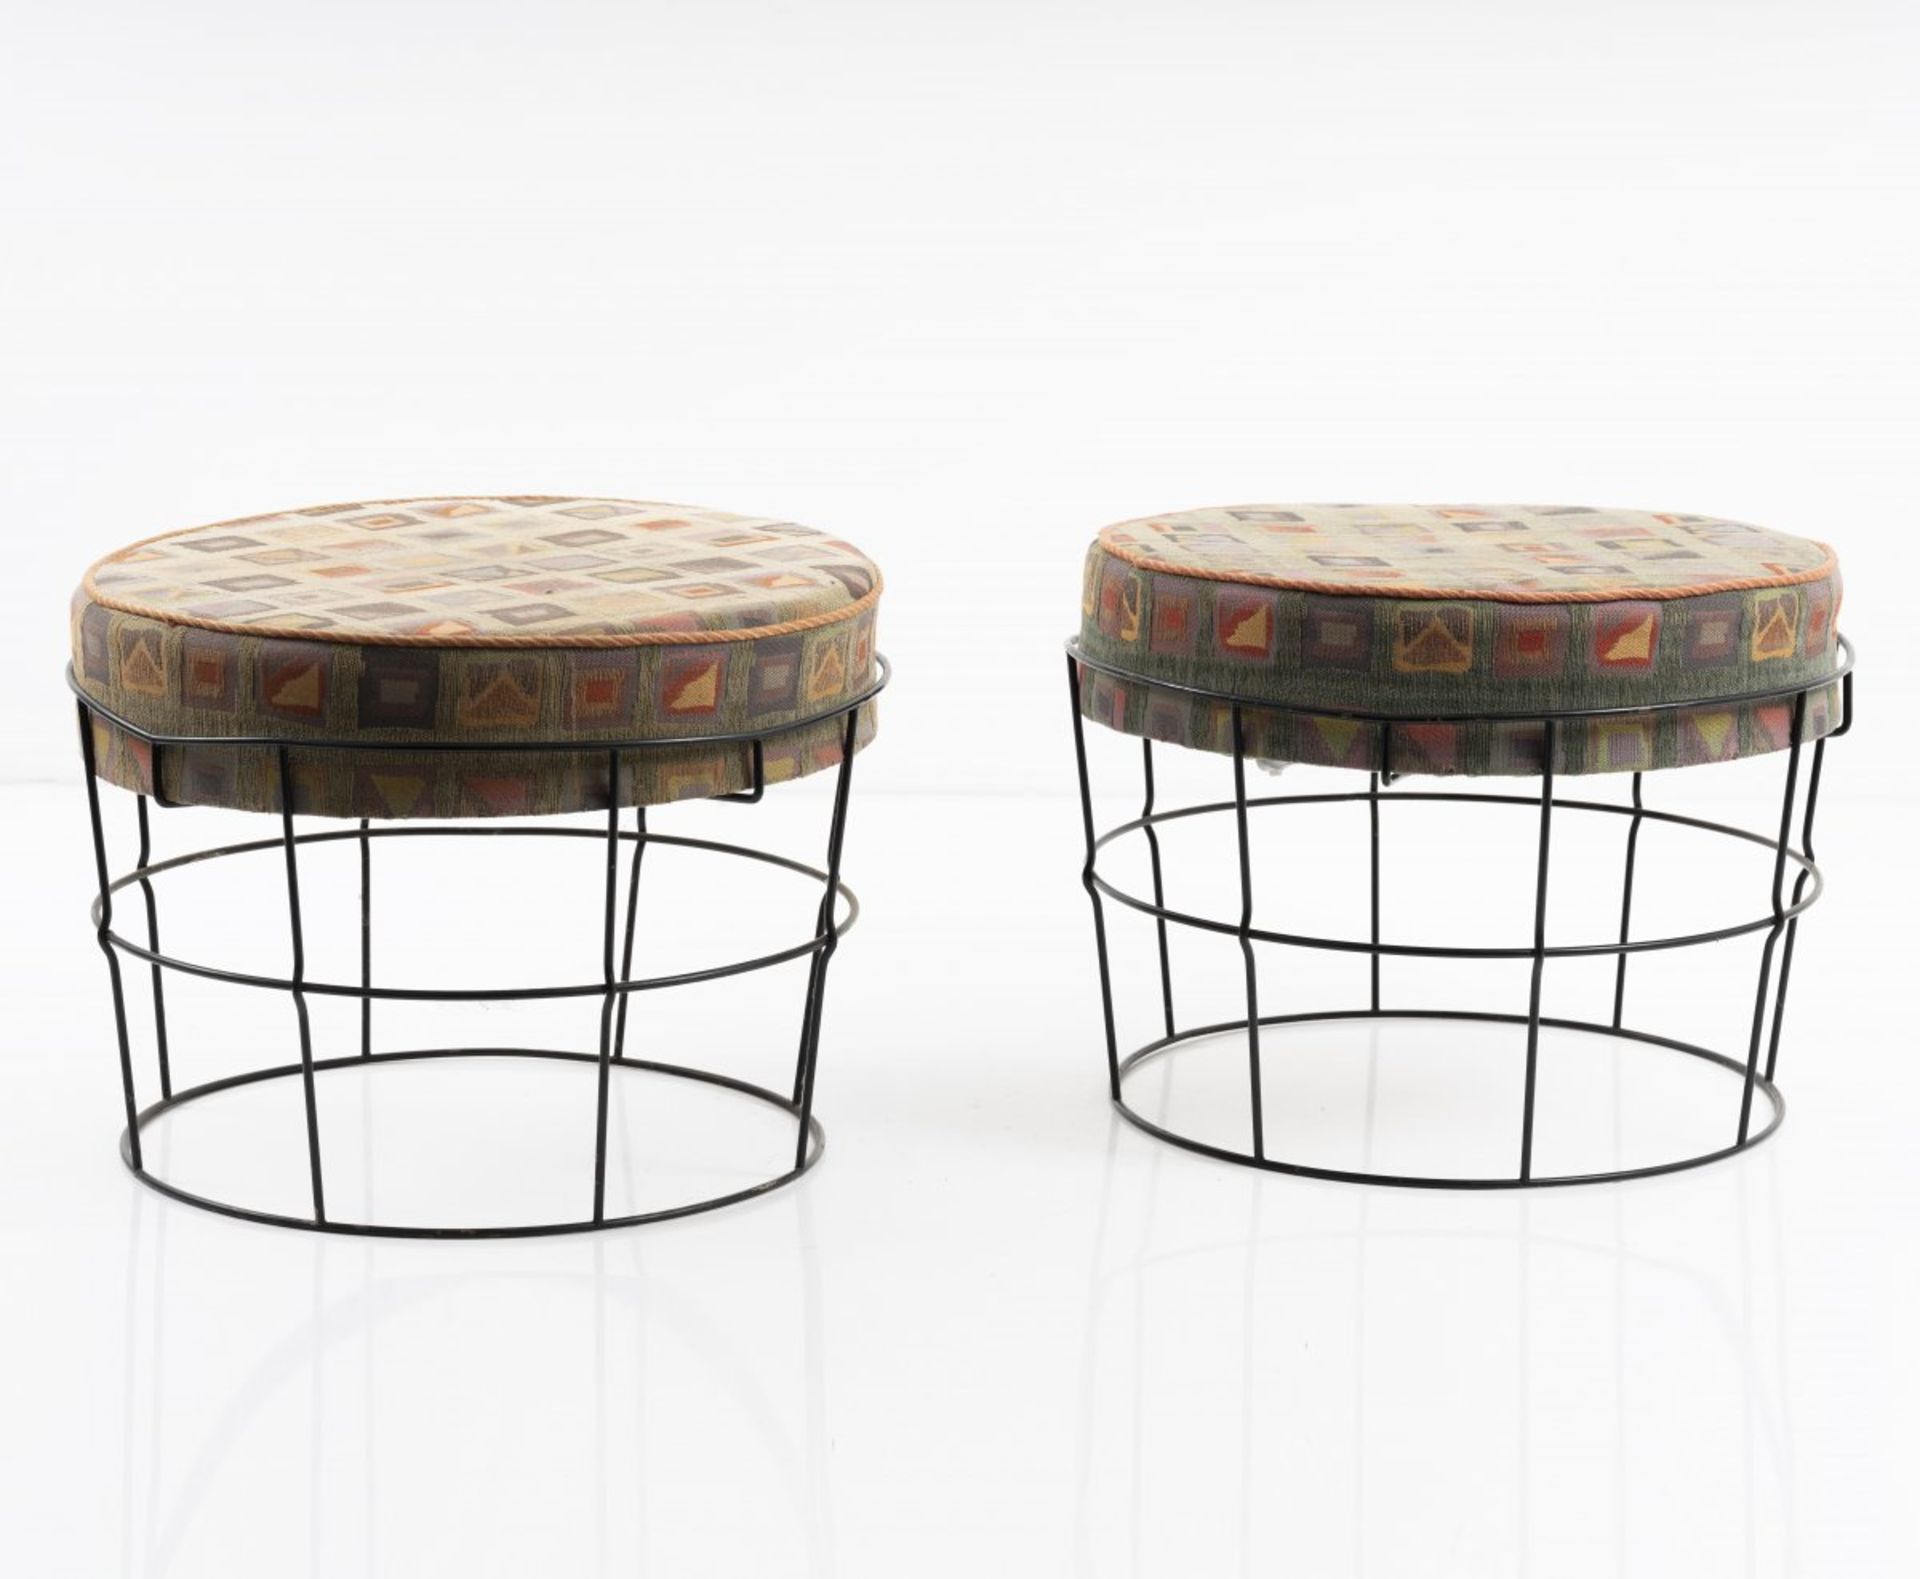 Verner Panton (in the style of), Set of two stools, 1960s - Bild 4 aus 5